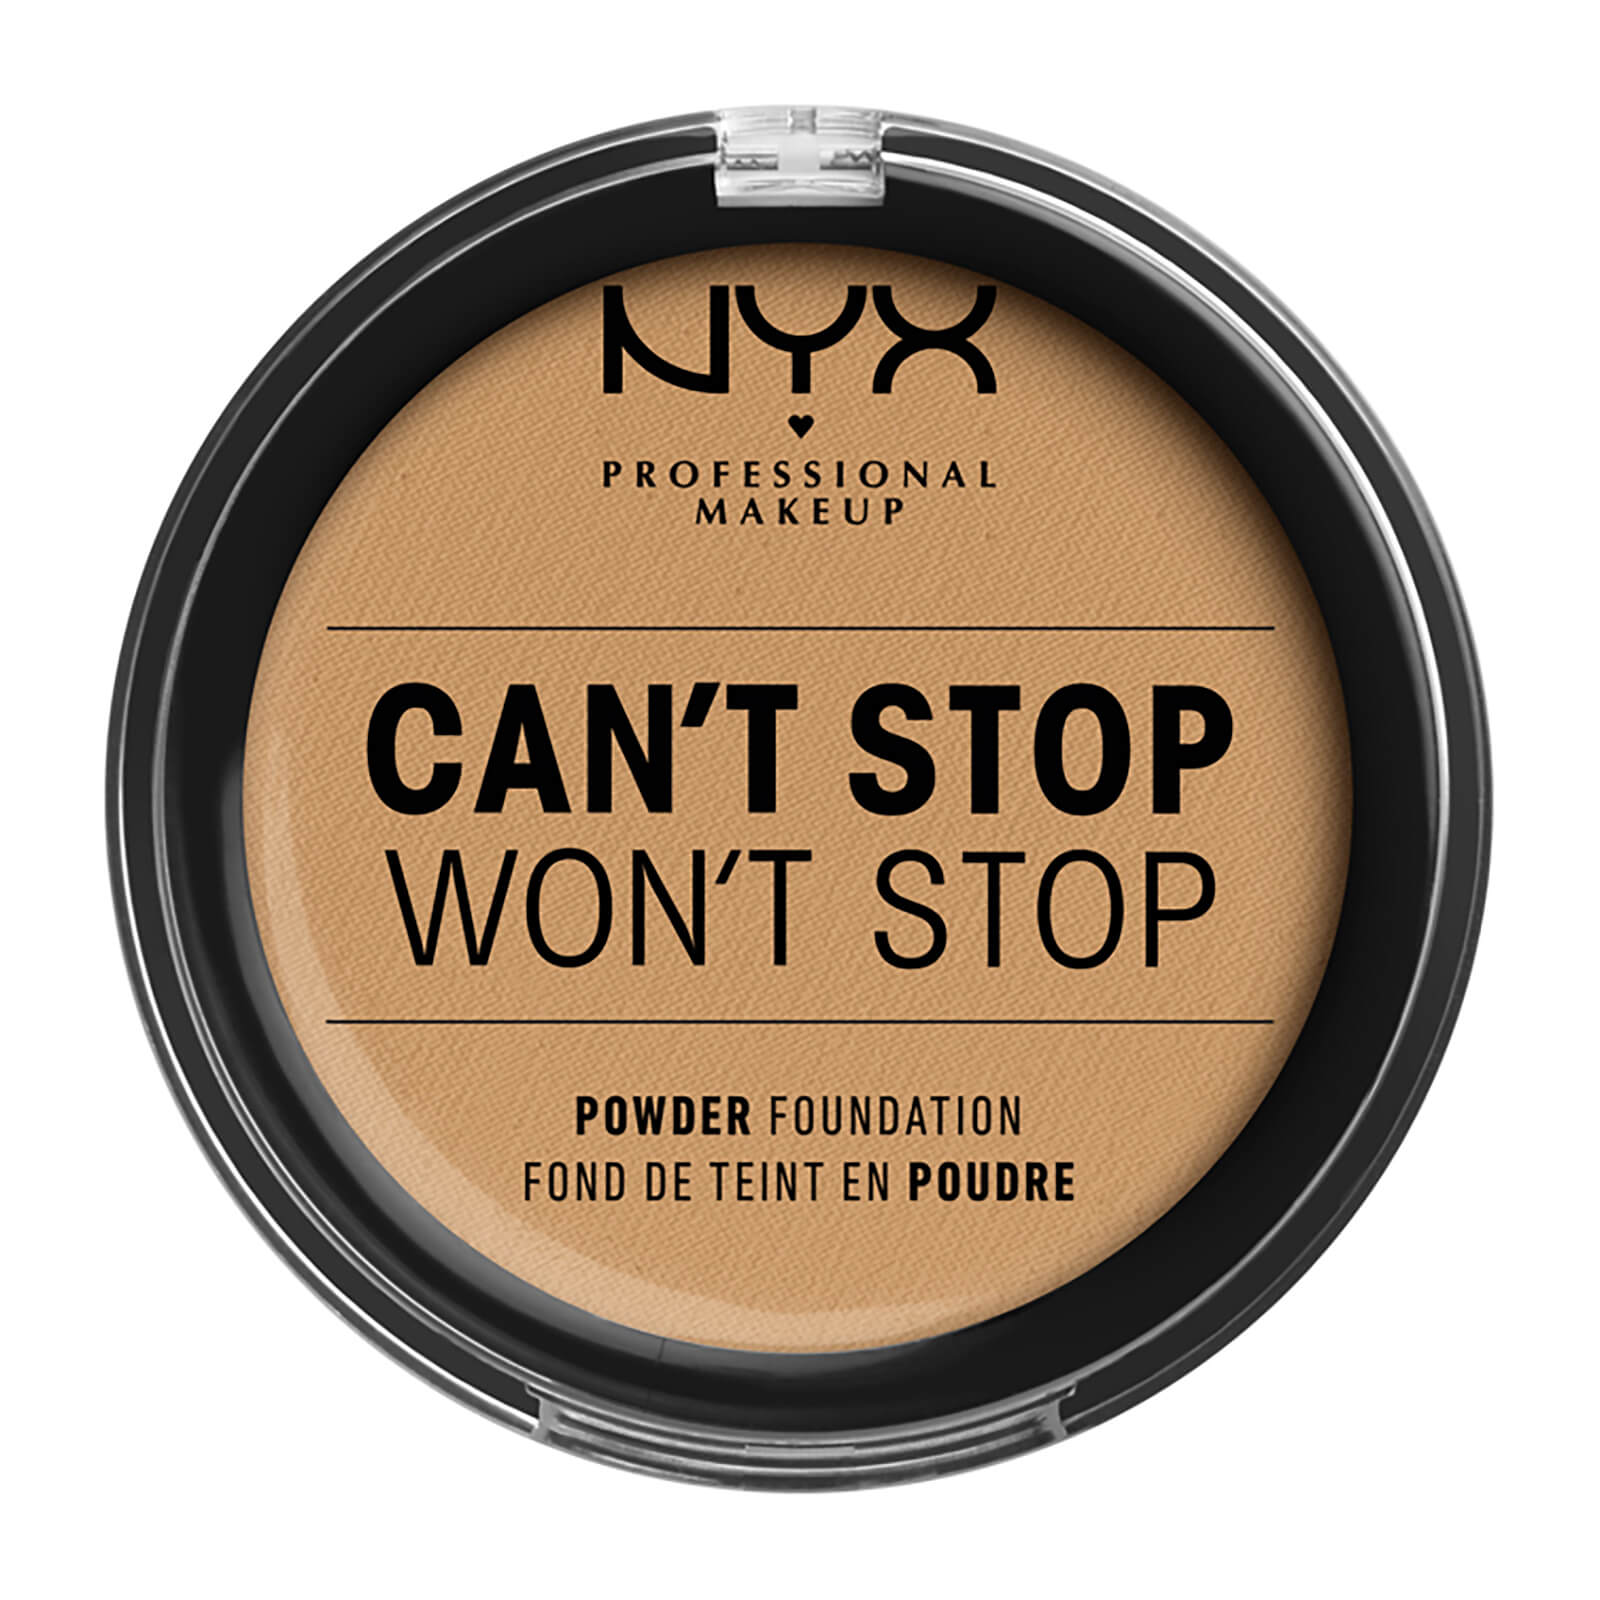 nyx professional makeup can't stop won't stop powder foundation (various shades) - beige